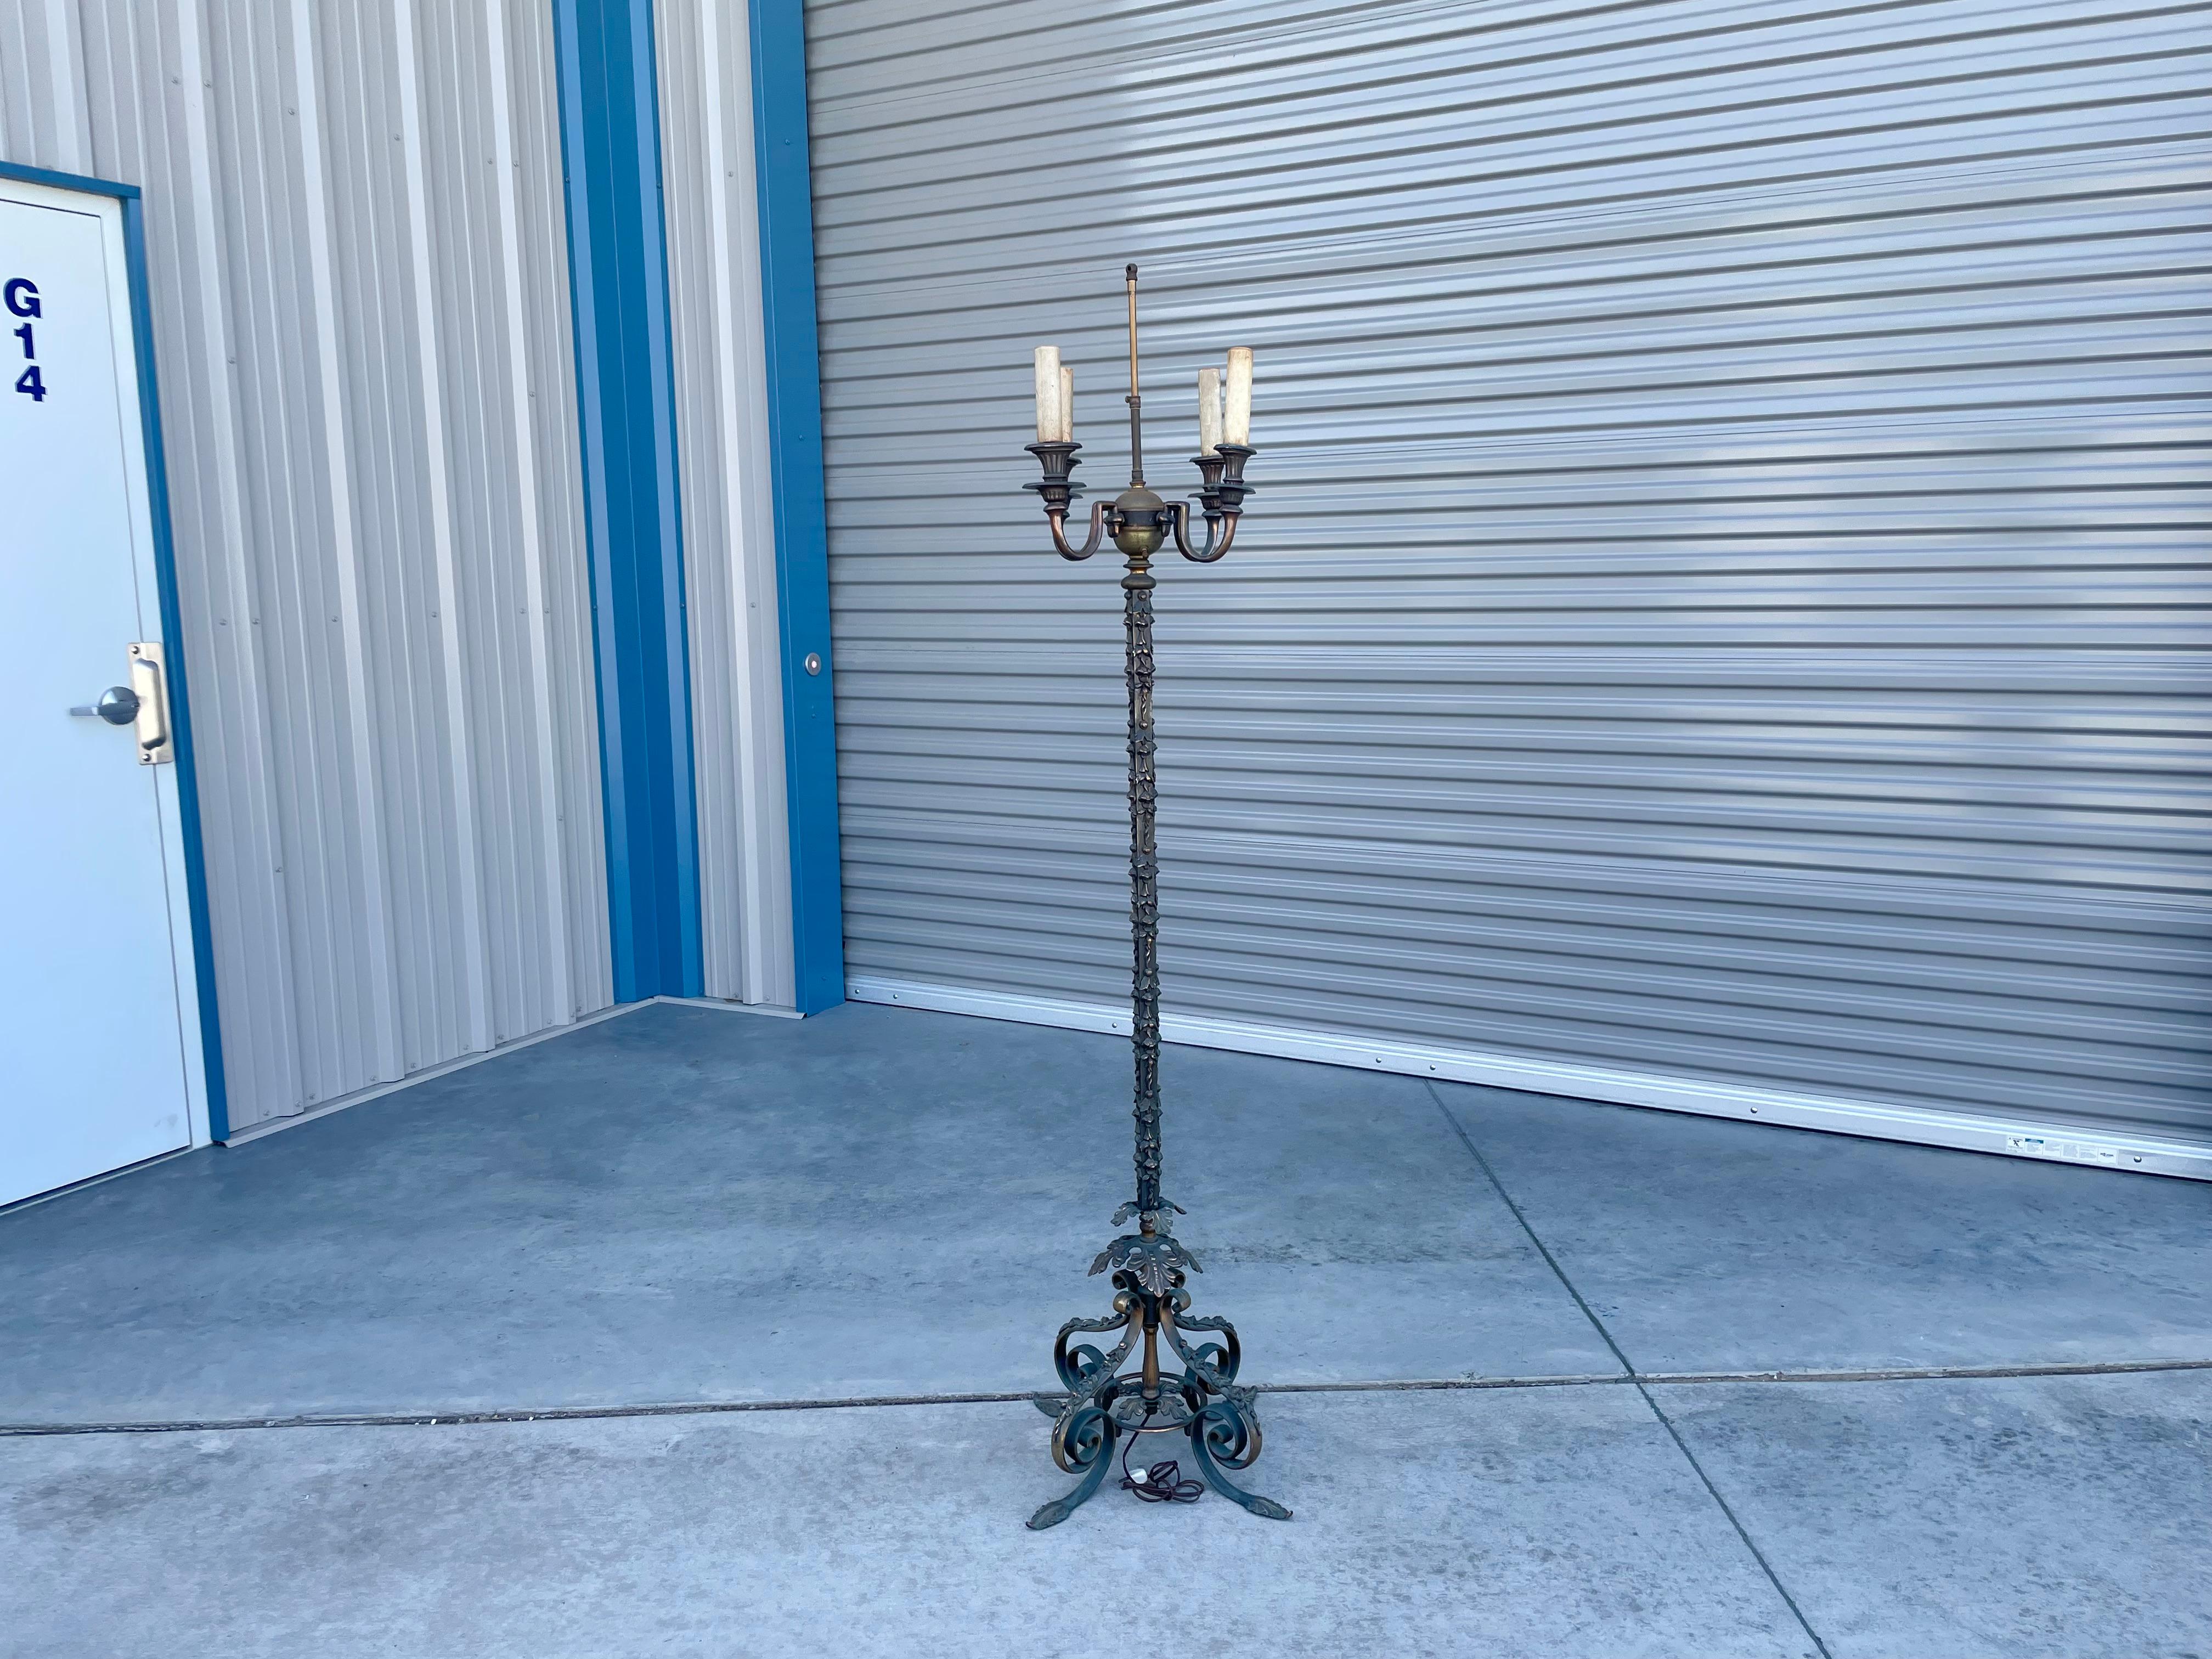 Vintage French bronze floor lamp designed and manufactured in France circa 1900s. This fantastic floor lamp features a solid bronze frame with a unique leaf design surrounding the light giving it a great distinctive design for their era.